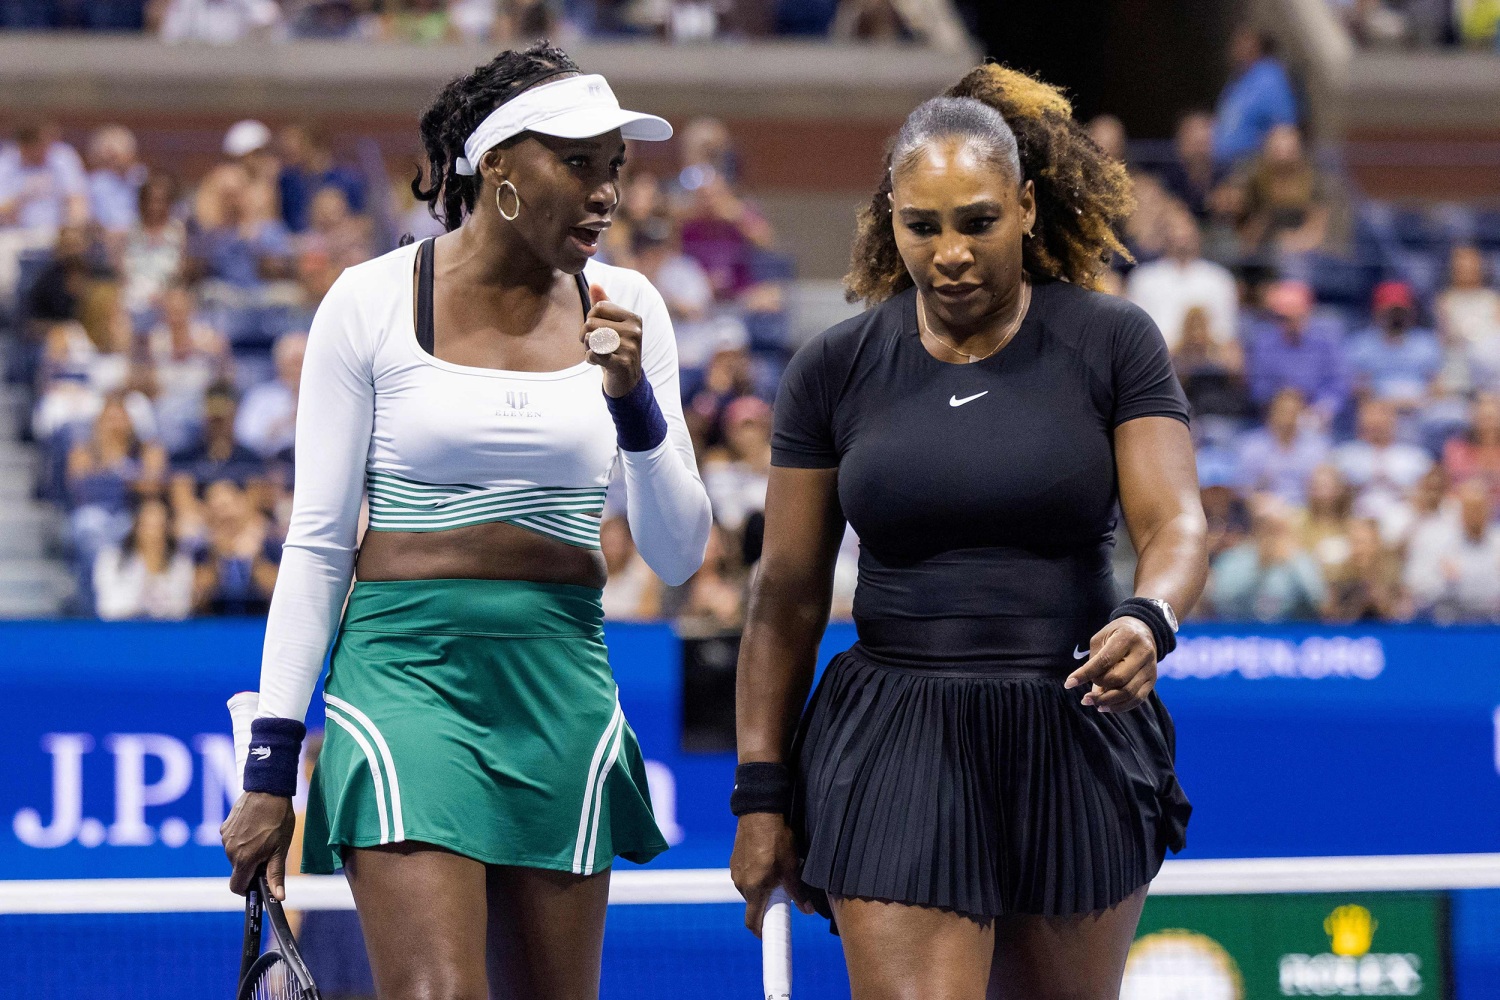 Serena and Venus Williams overpowered in doubles play at U.S. Open